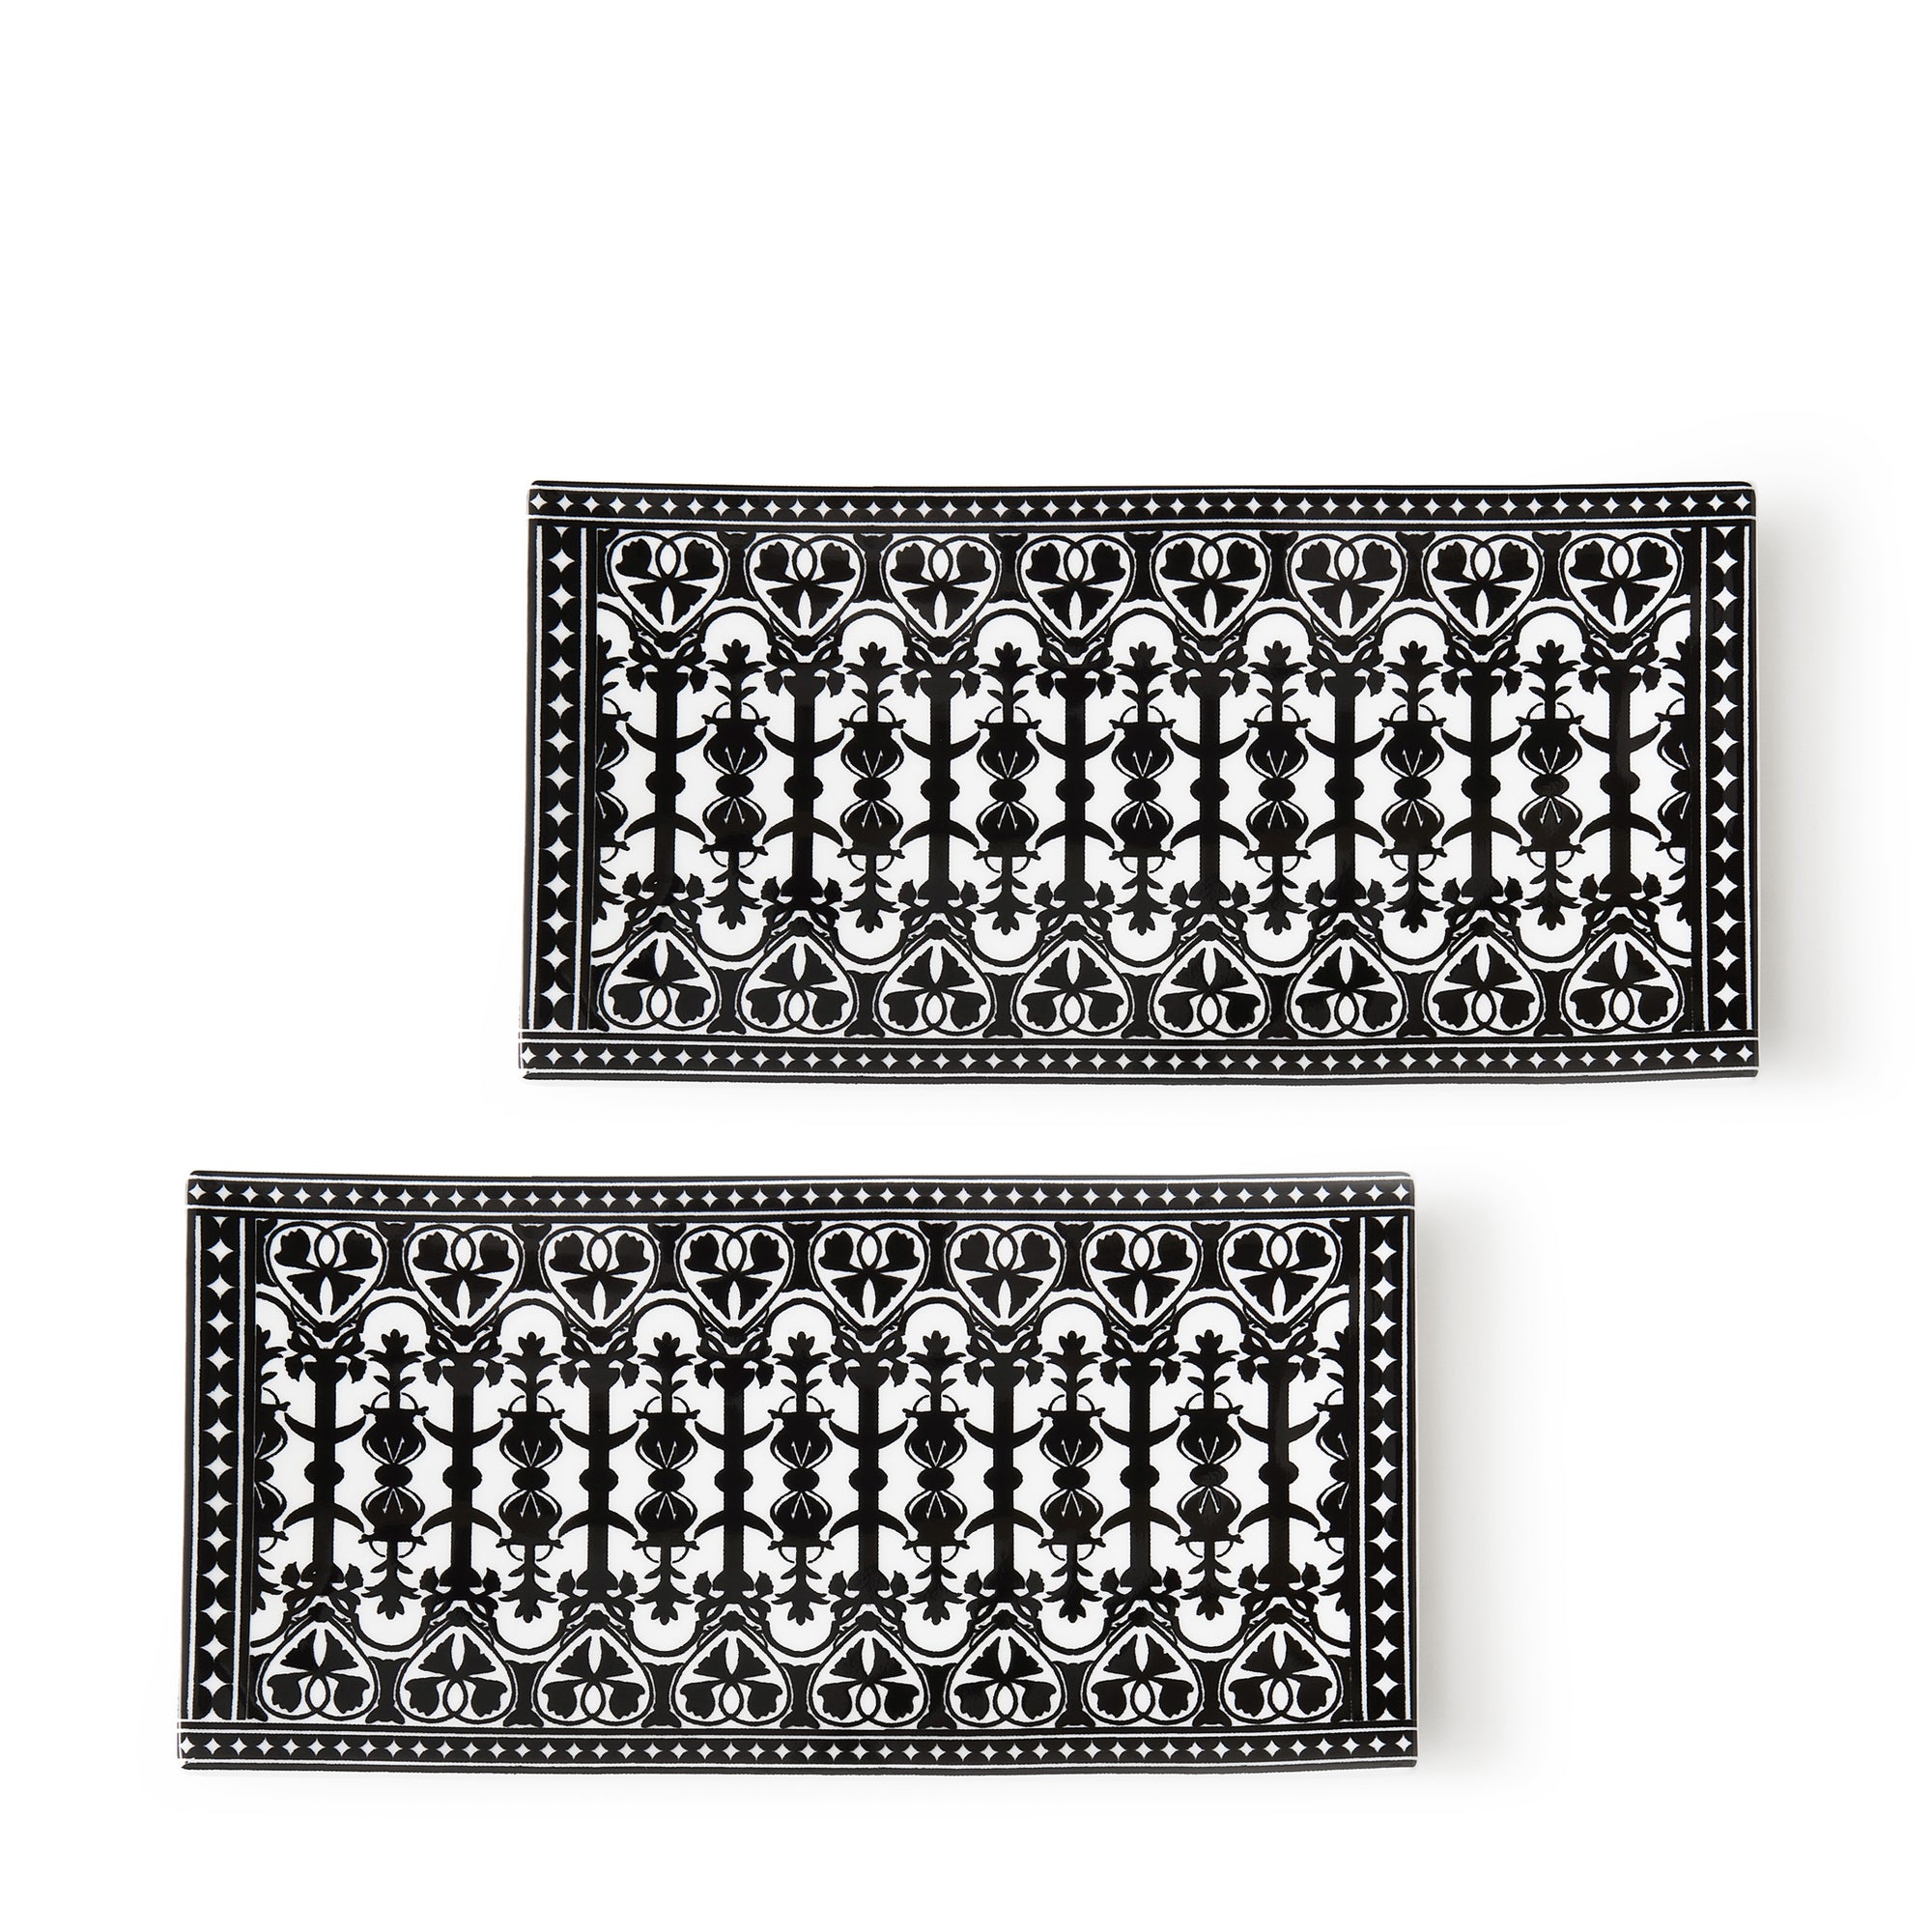 Two rectangular bone china trays with intricate black-and-white ornamental patterns, featuring symmetrical designs of hearts, swirls, and geometric shapes. These hand-decorated Casablanca Medium Sushi Trays, Set of 2 by Caskata add elegance to any table setting.